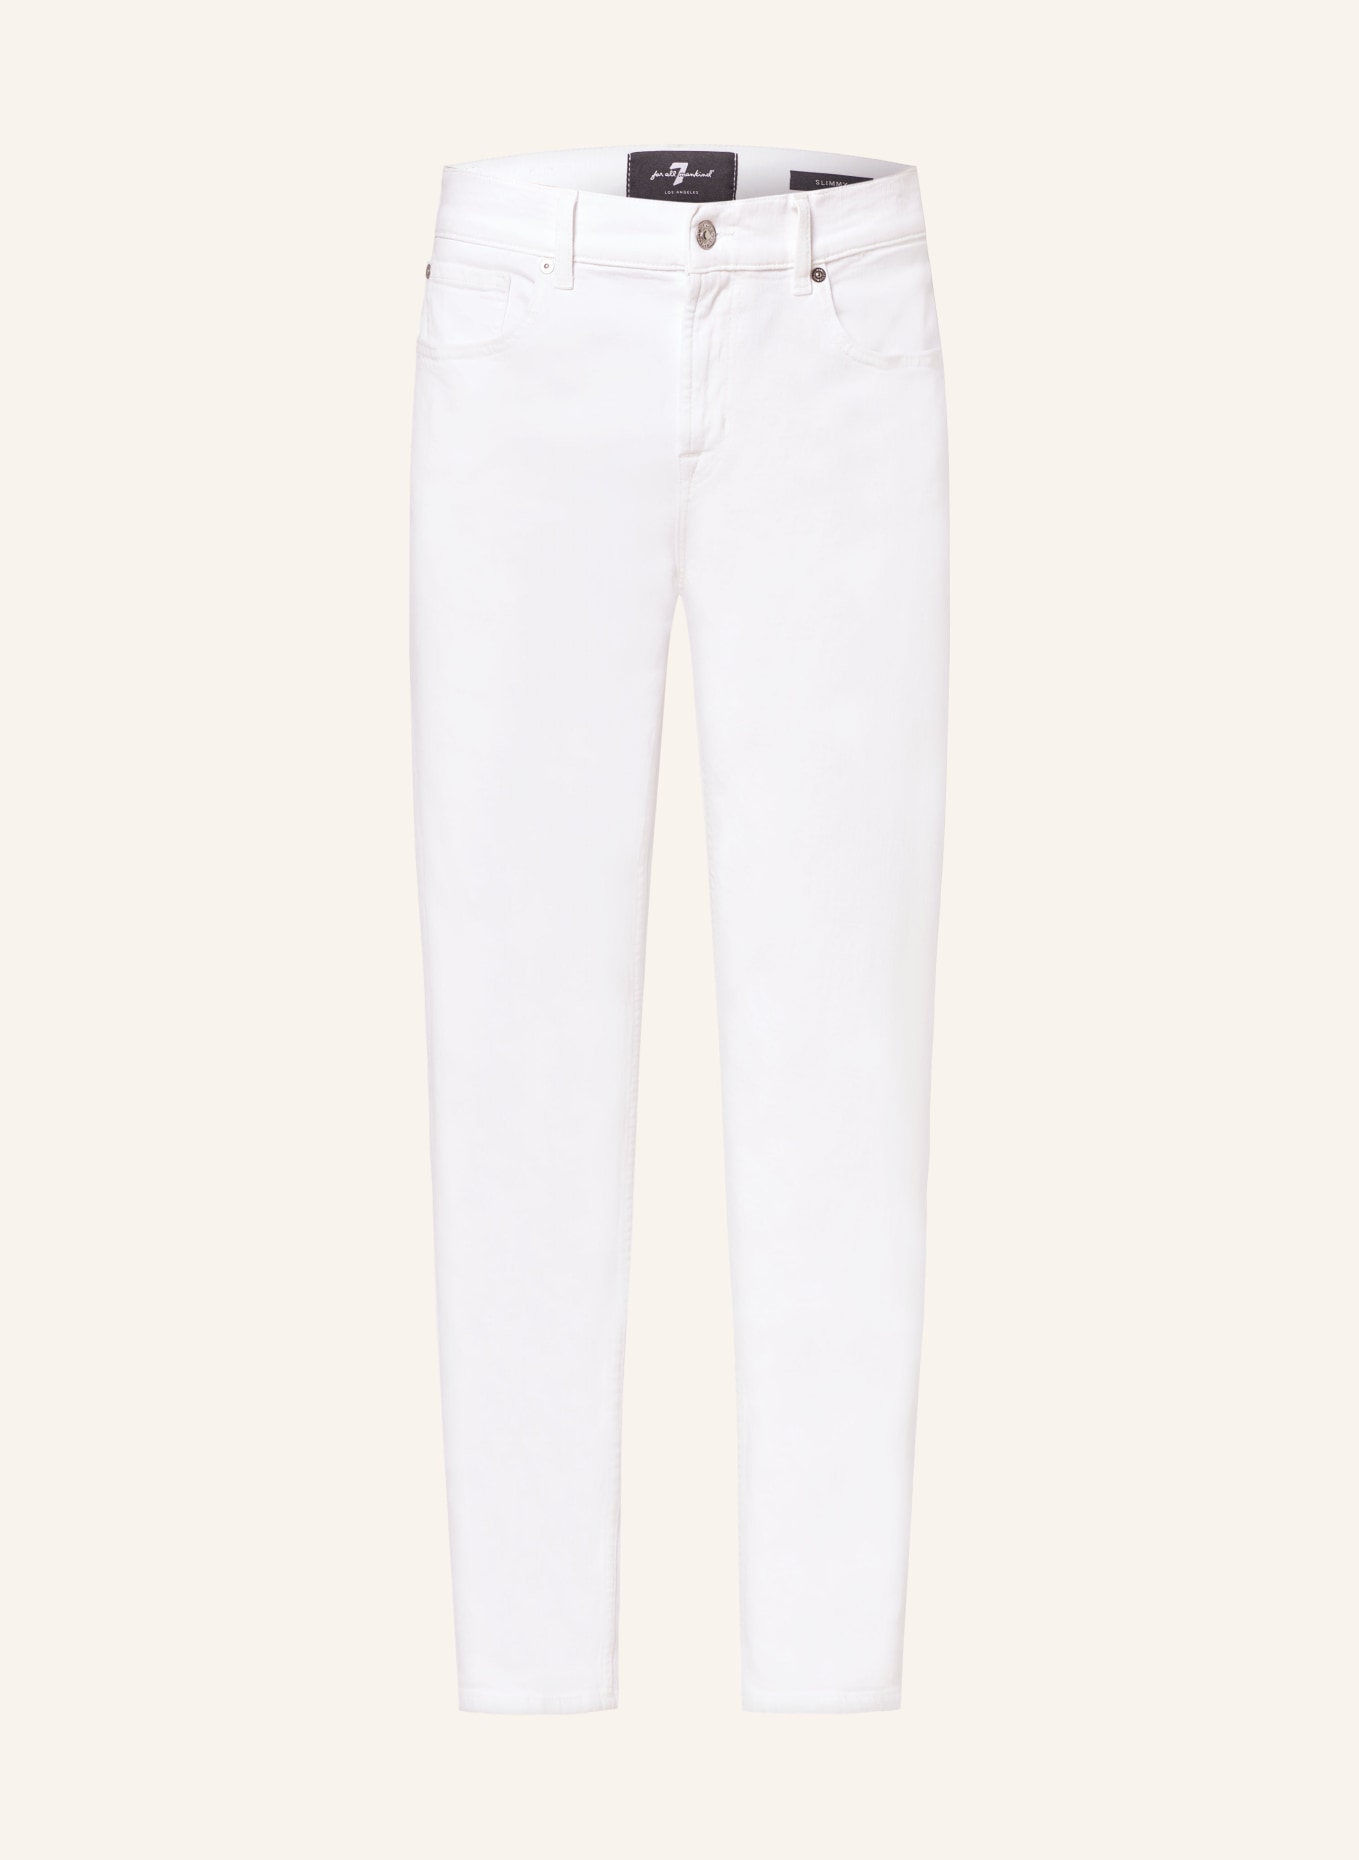 7 for all mankind Jeans SLIMMY Slim Fit, Farbe: WHITE (Bild 1)